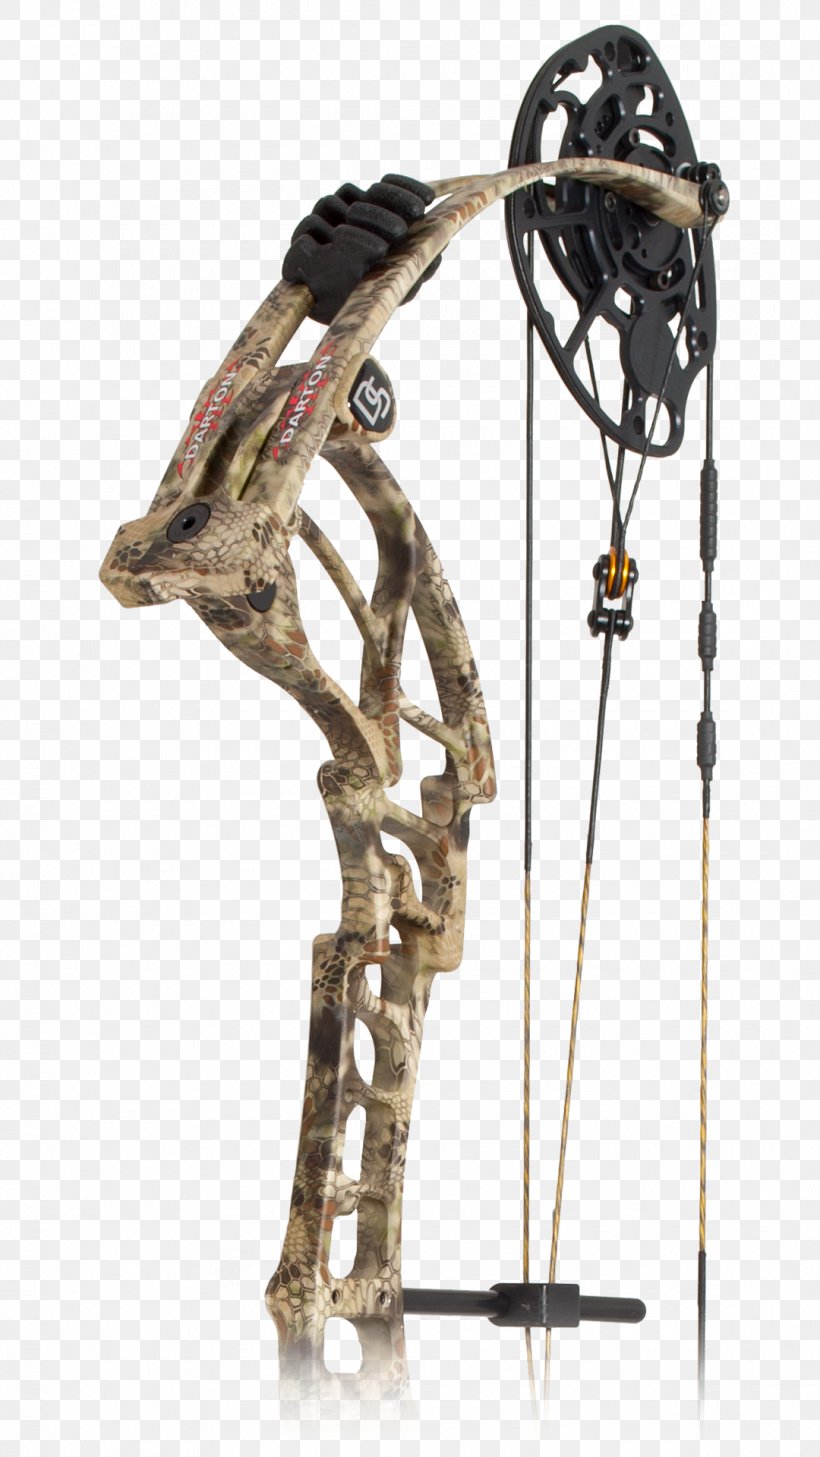 Compound Bows Darton Archery Manufacturing Darton Road Bow And Arrow, PNG, 1080x1920px, Compound Bows, Archery, Bow, Bow And Arrow, Compound Bow Download Free